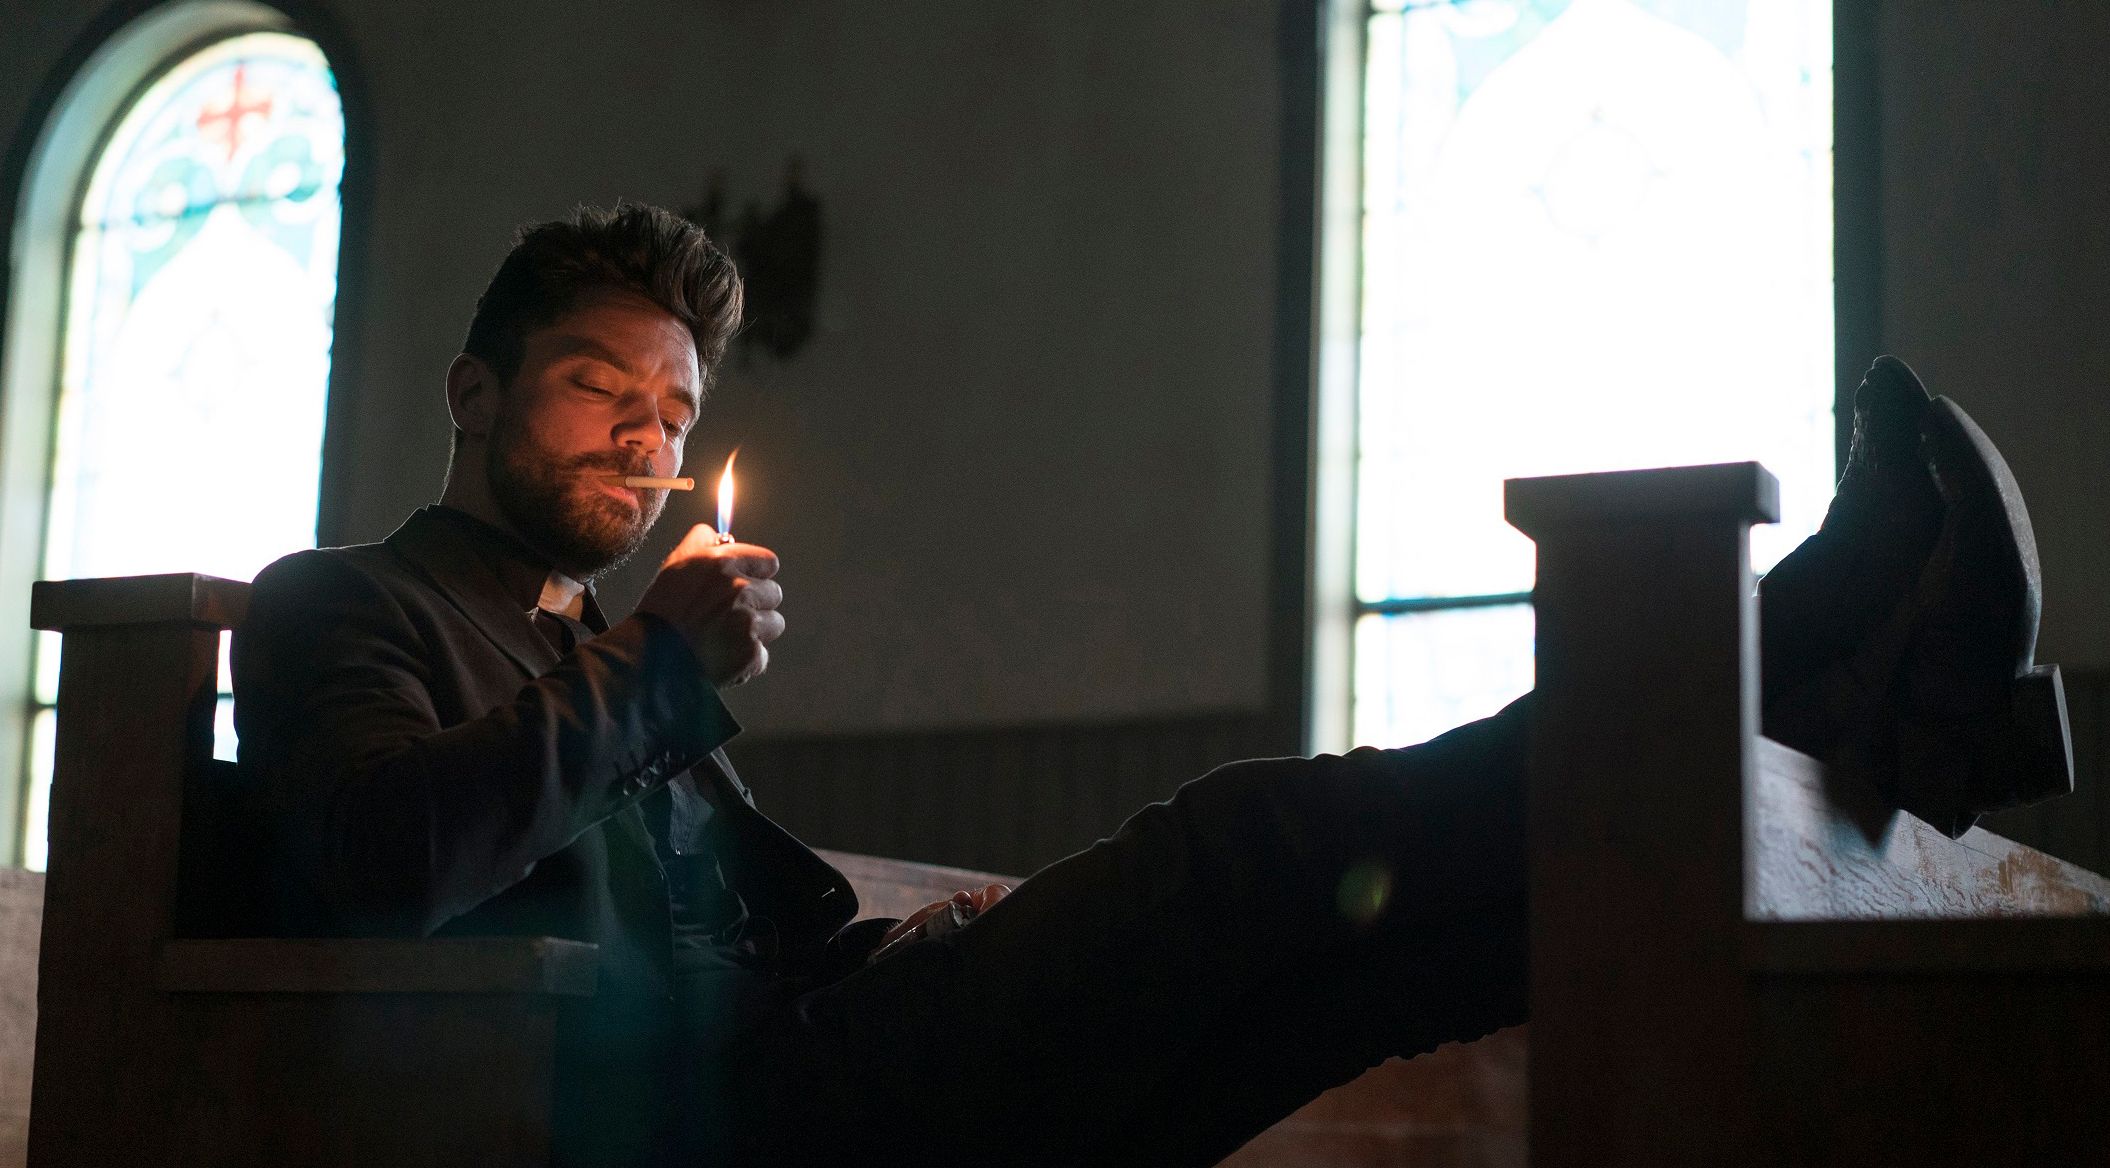 Preacher: The Biggest Changes From Book to TV